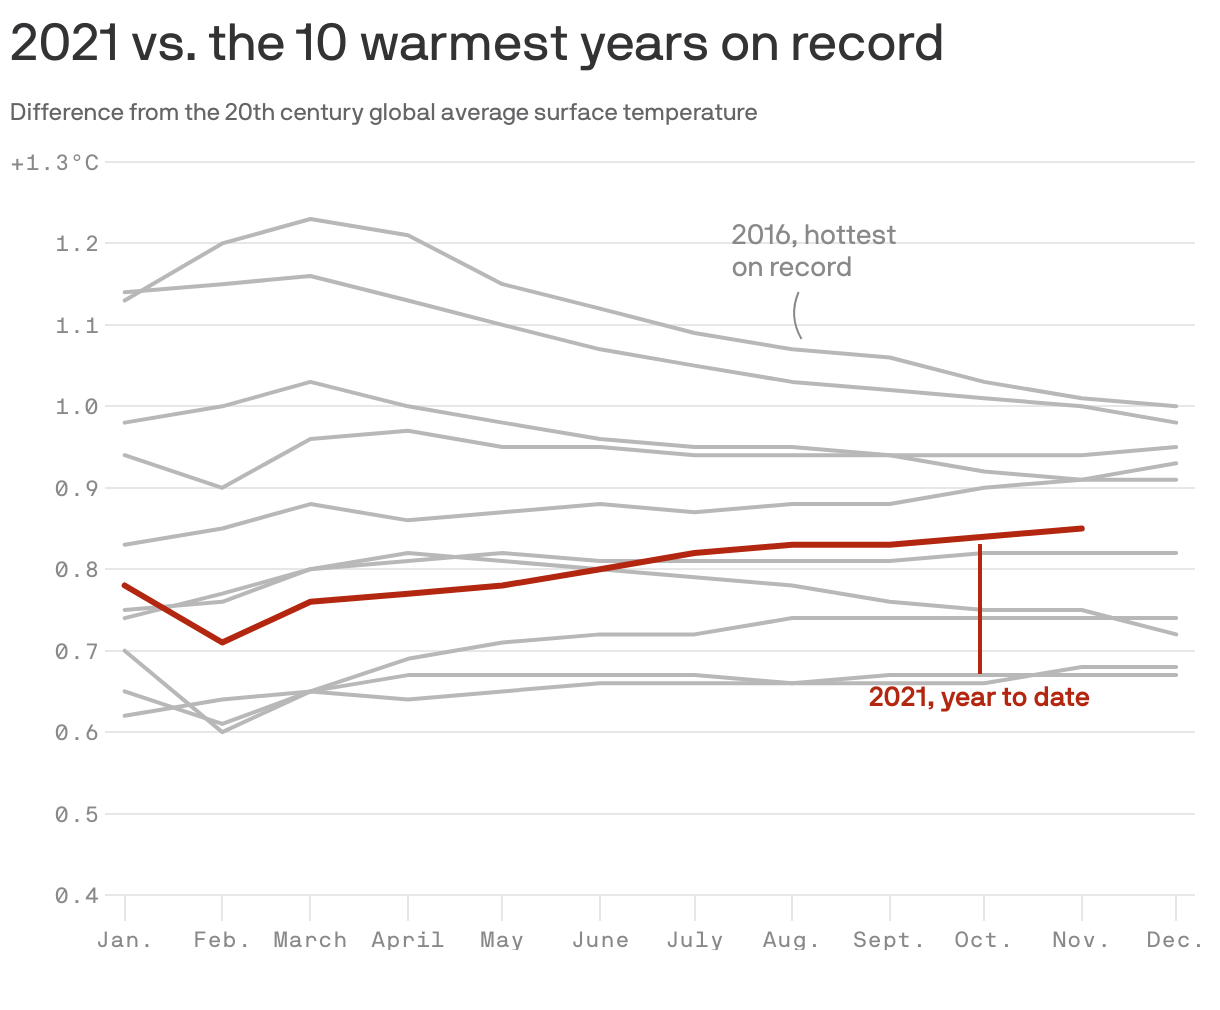 2021 vs. the 10 warmest years on record